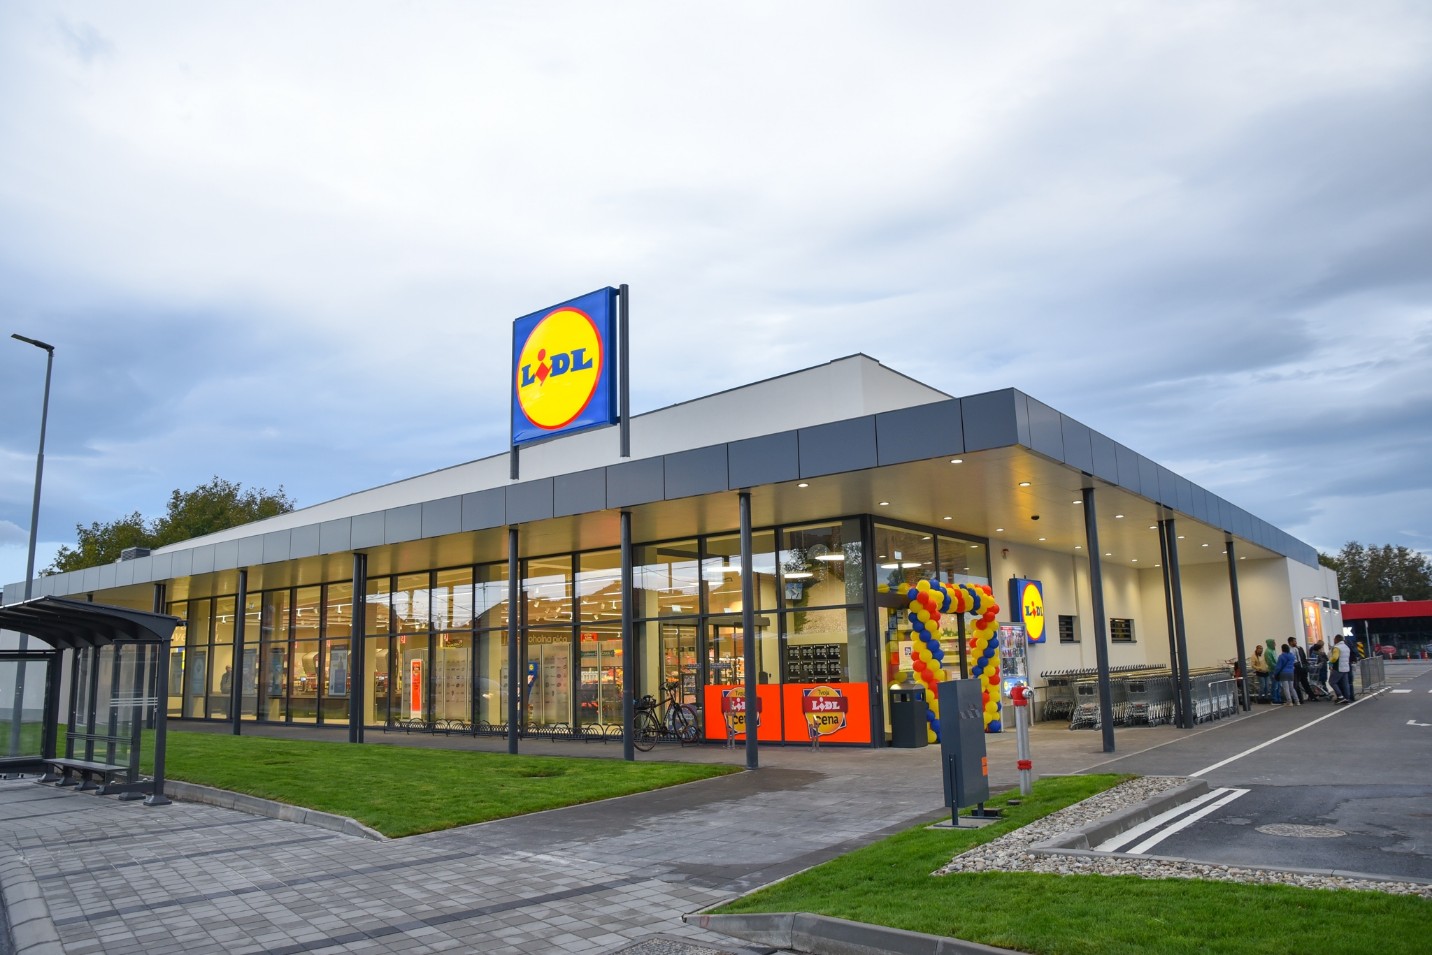 Execution of electrical installation works at the "Lidl" facility in Ćuprija